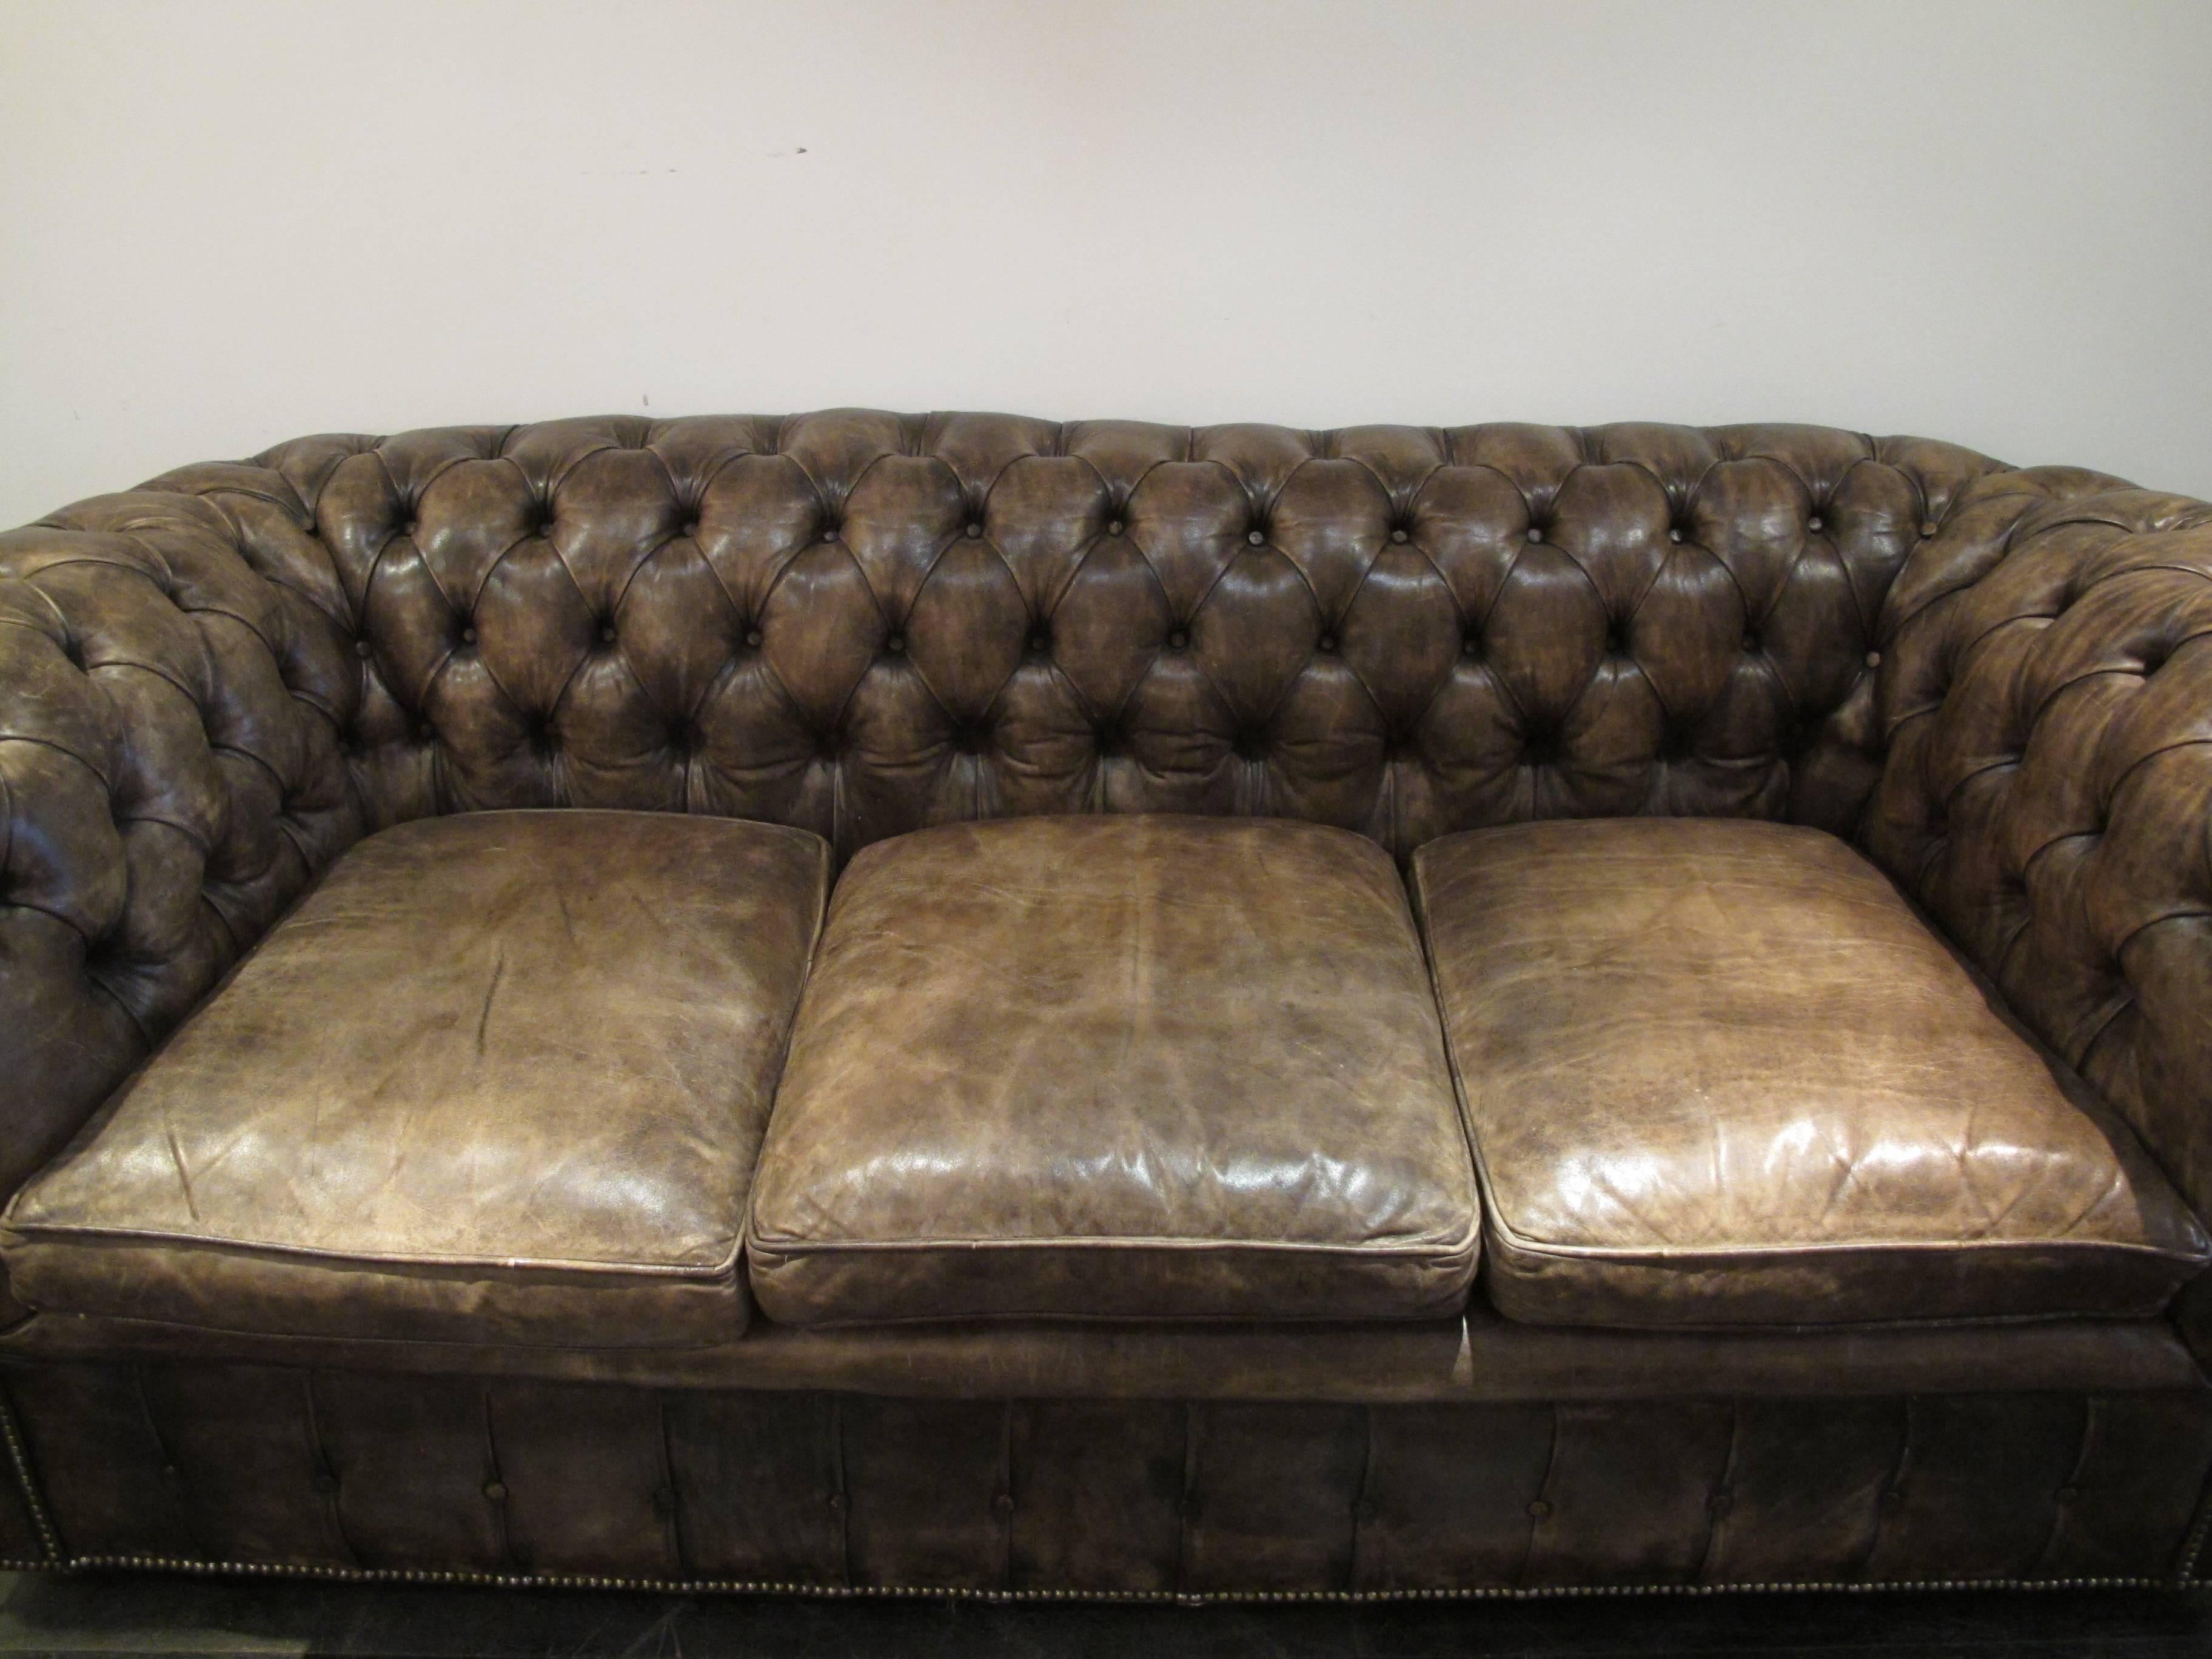 A beautiful aged leather chesterfield, brown faded patina, circa 1950.